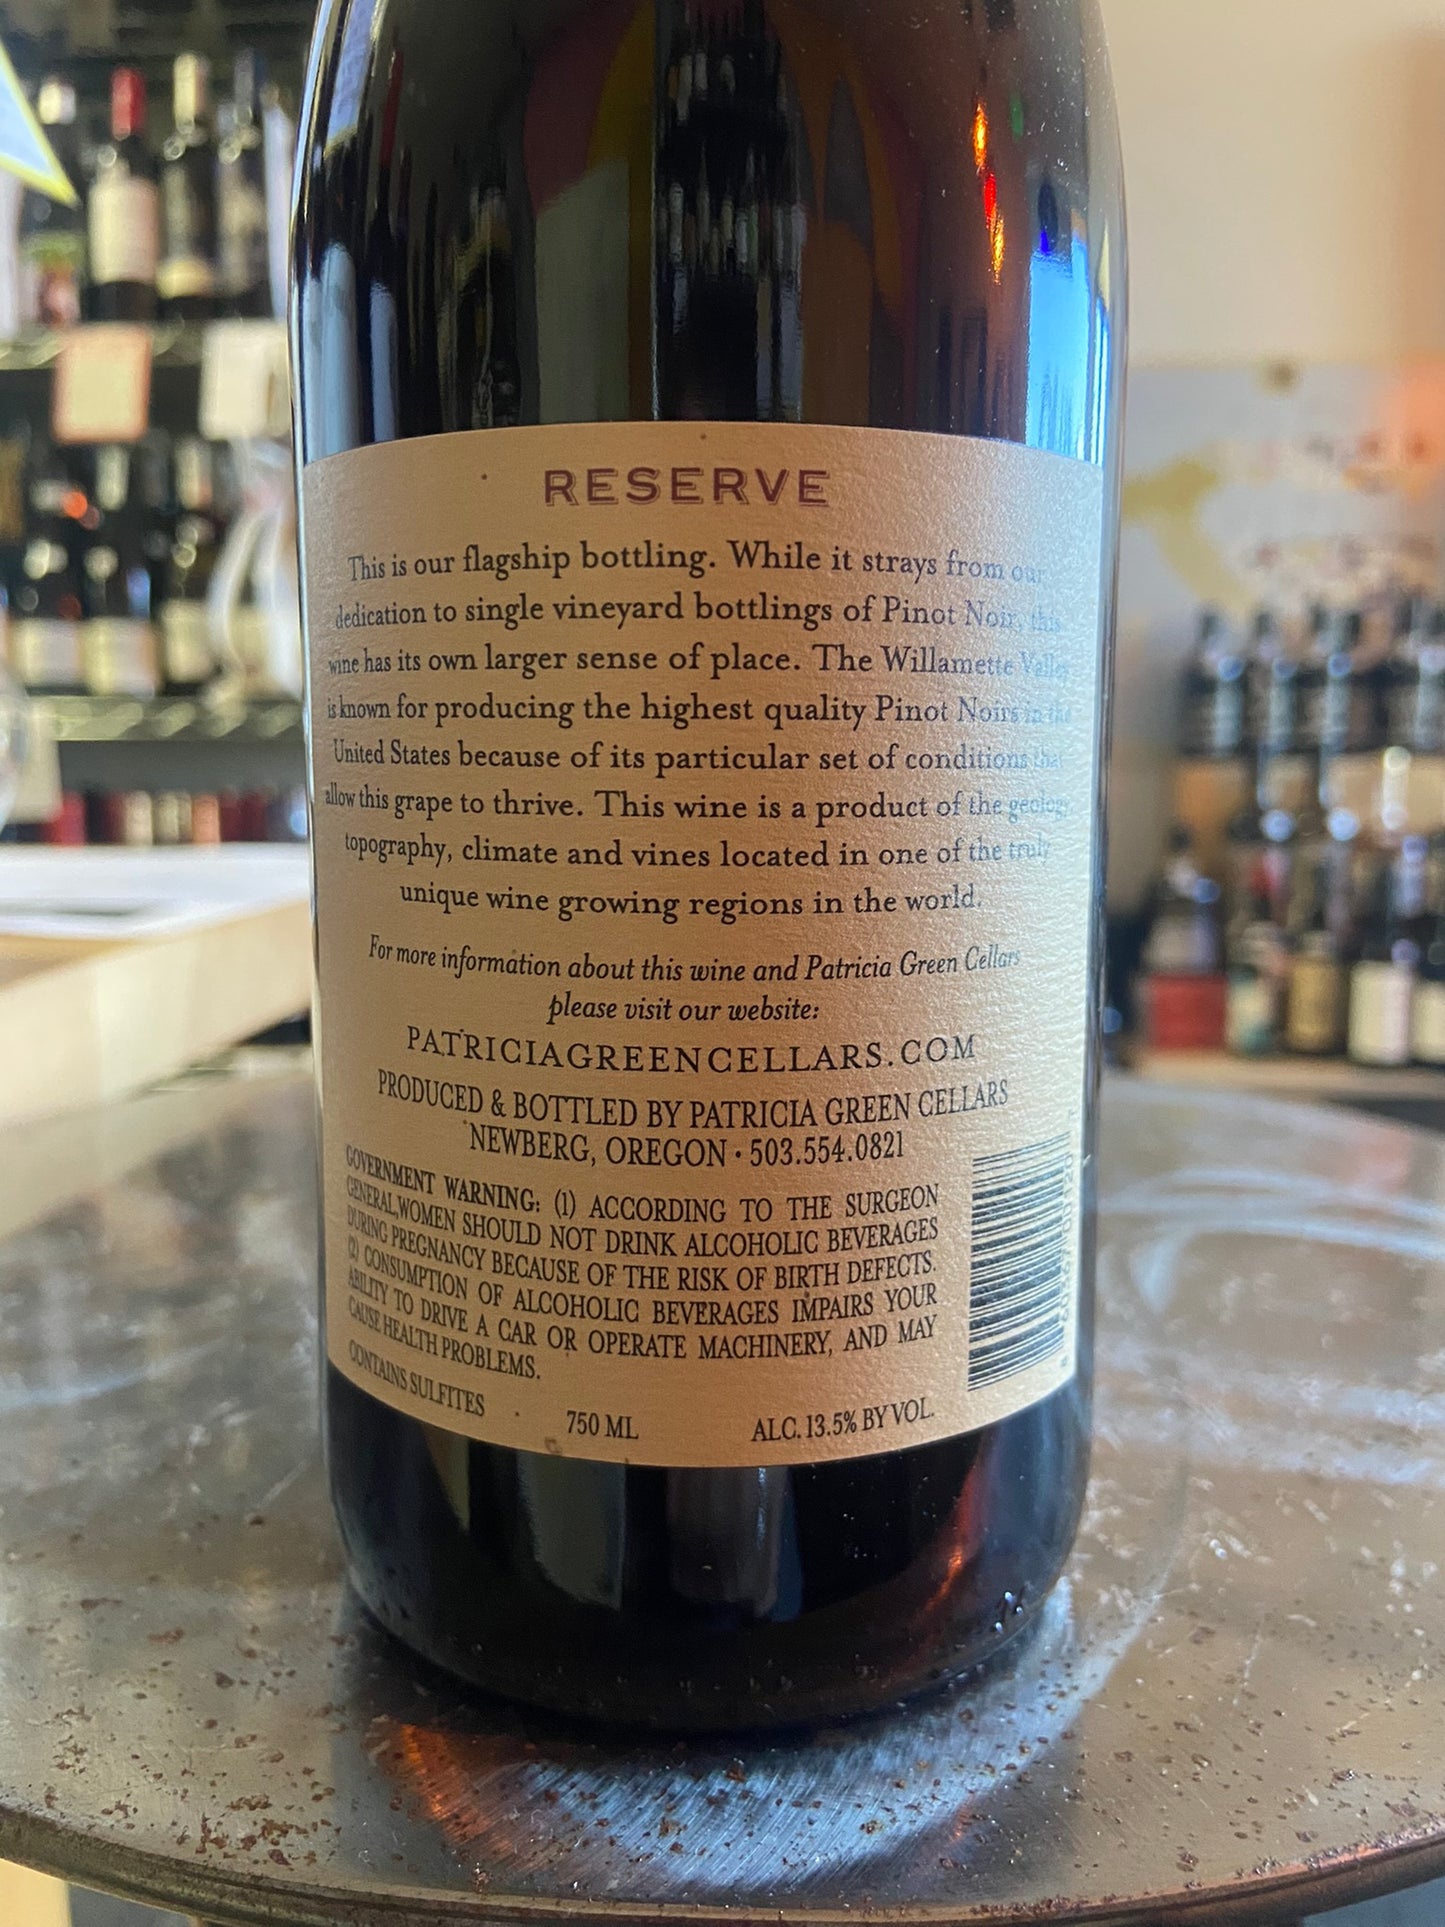 PATRICIA GREEN CELLARS 2021 Reserve Pinot Noir (Willamette Valley, OR)